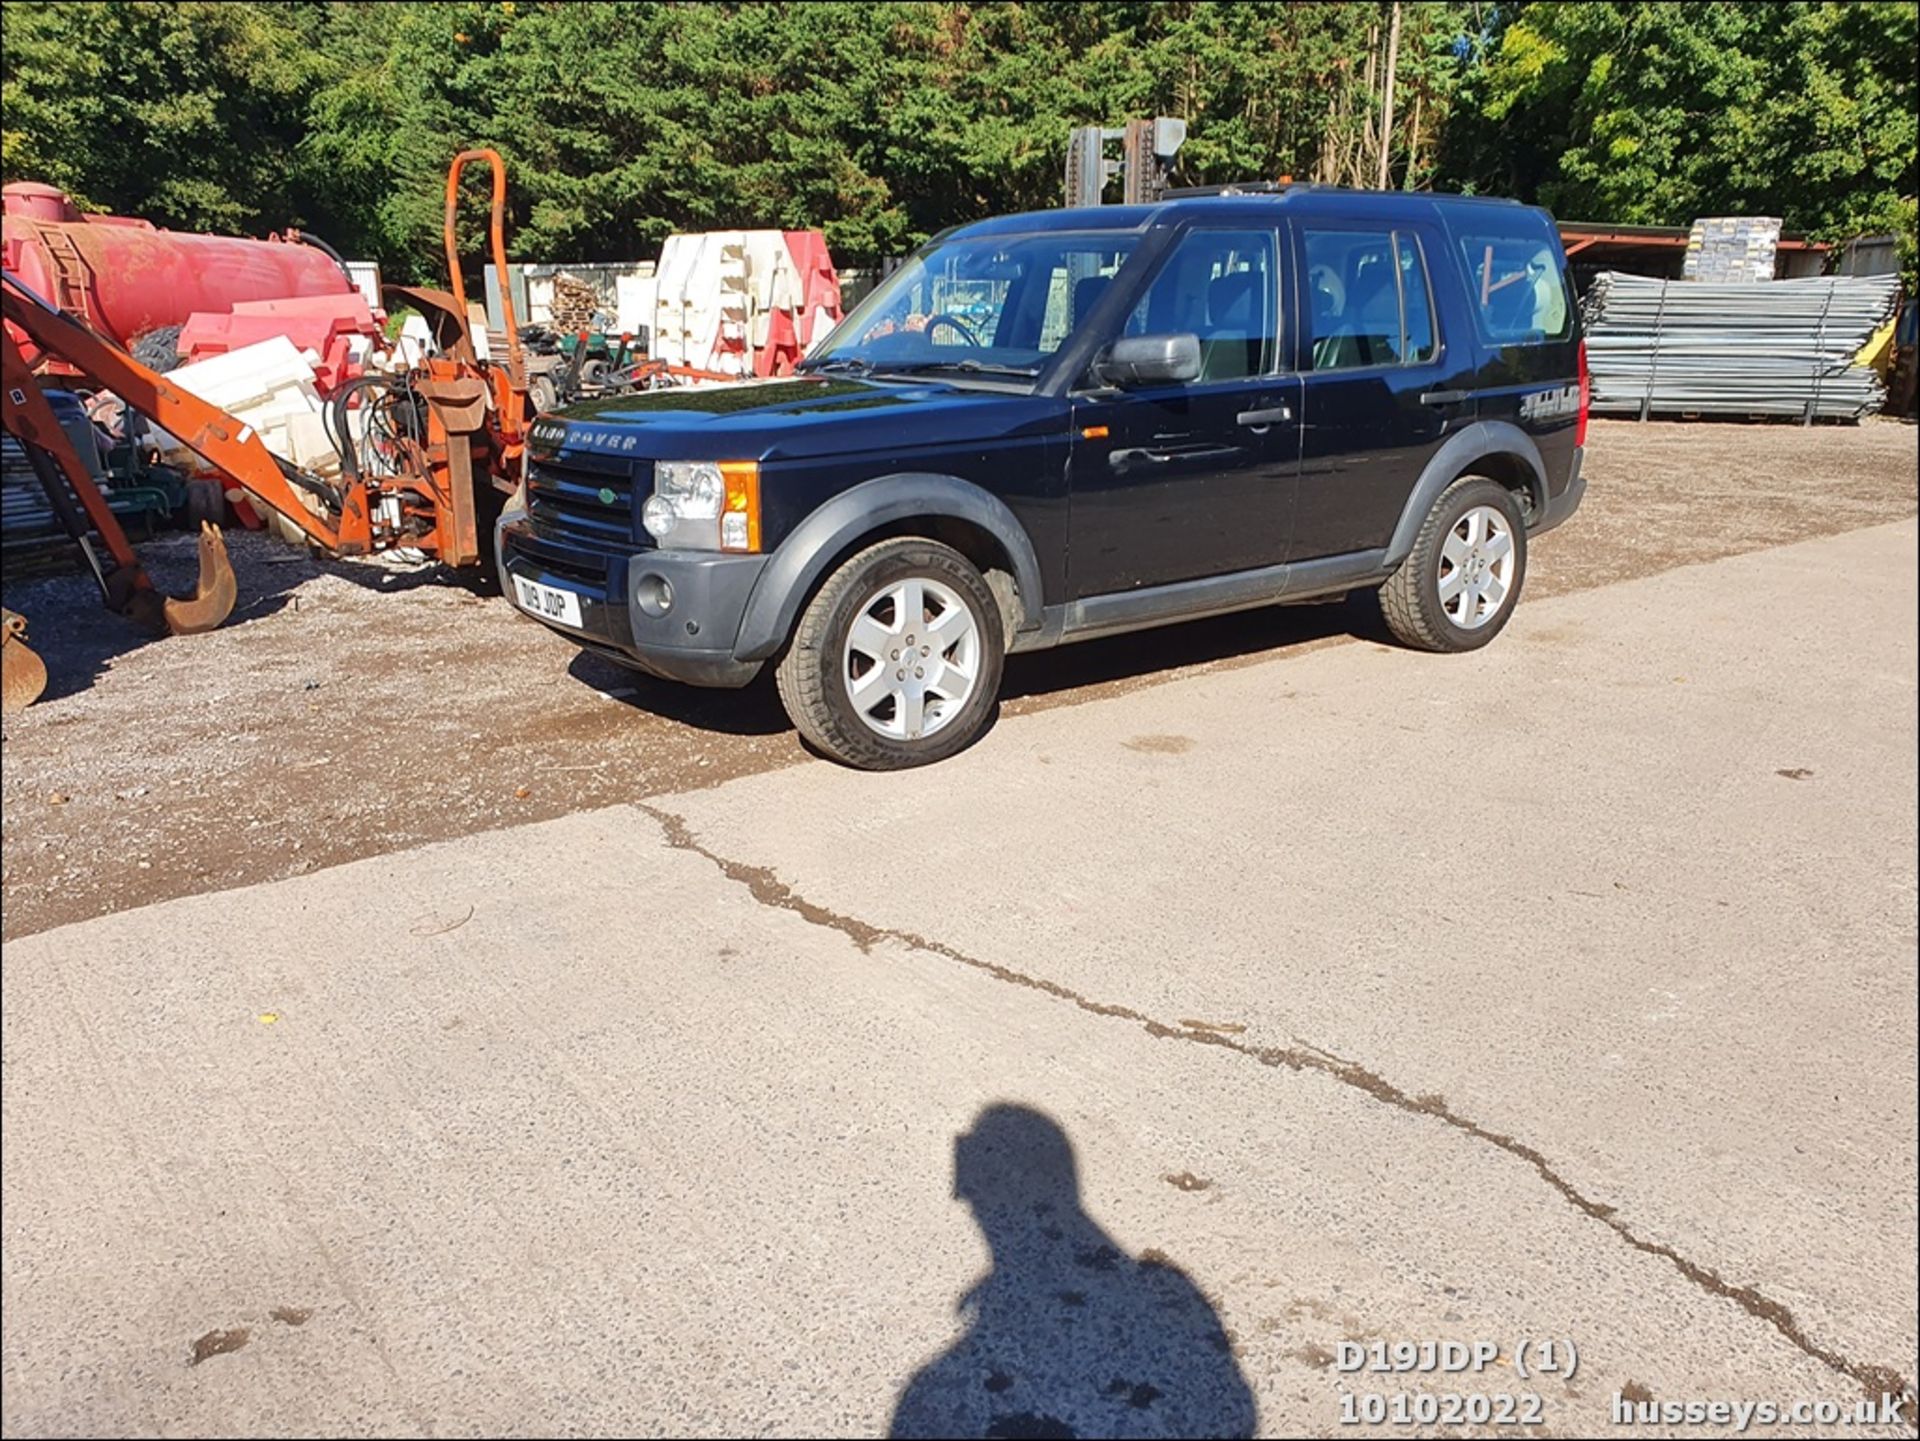 2008 LAND ROVER DISCOVERY TDV6 HSE A - 2720cc 5dr Estate (Blue, 164k) - Image 2 of 36